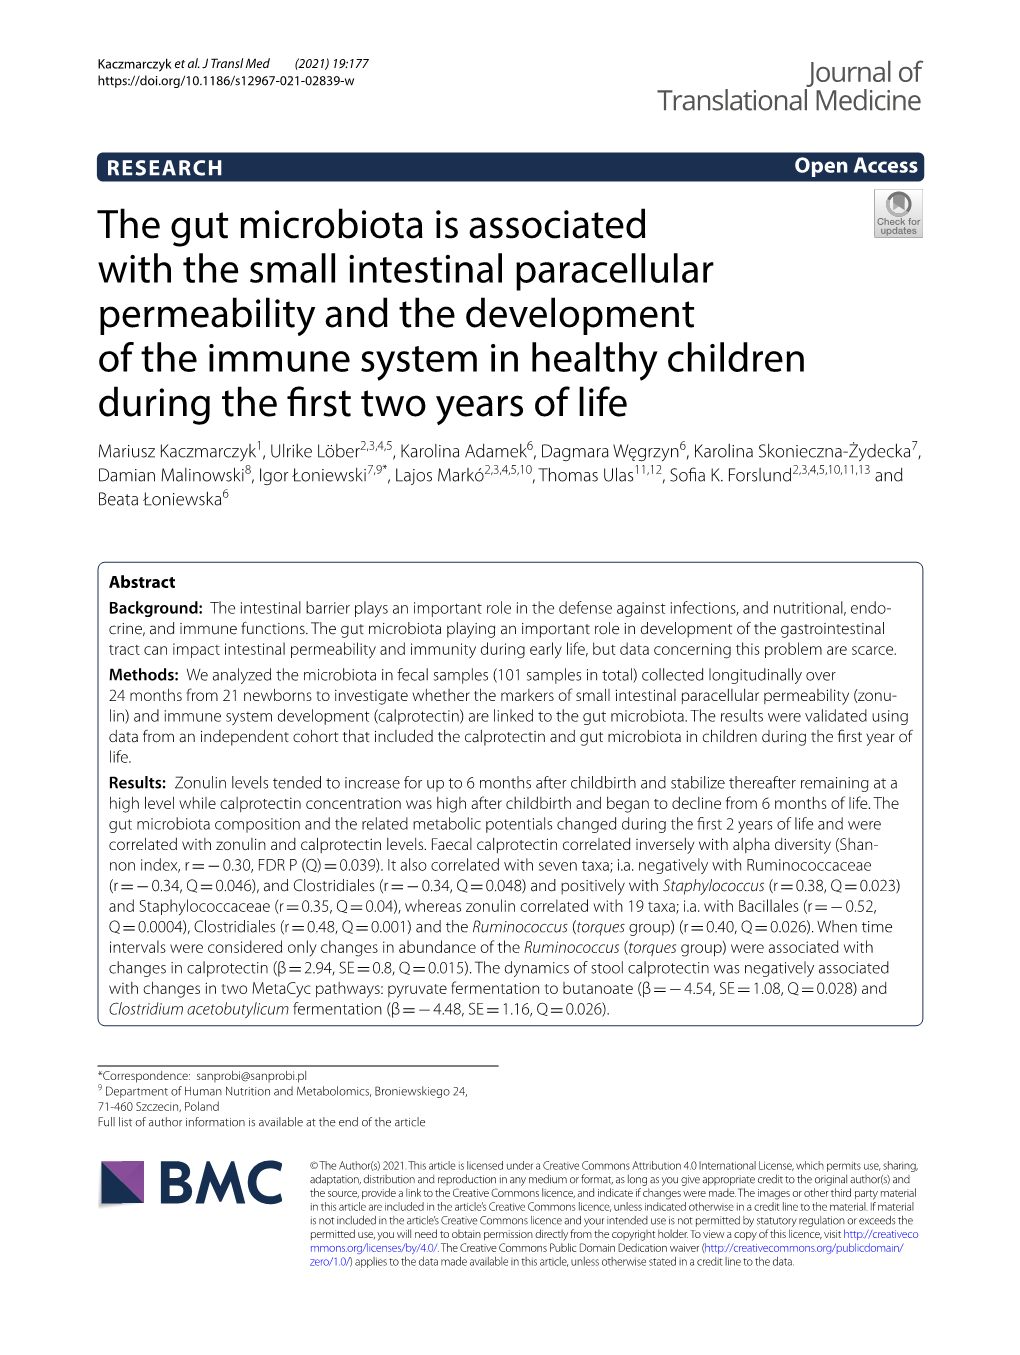 The Gut Microbiota Is Associated with the Small Intestinal Paracellular